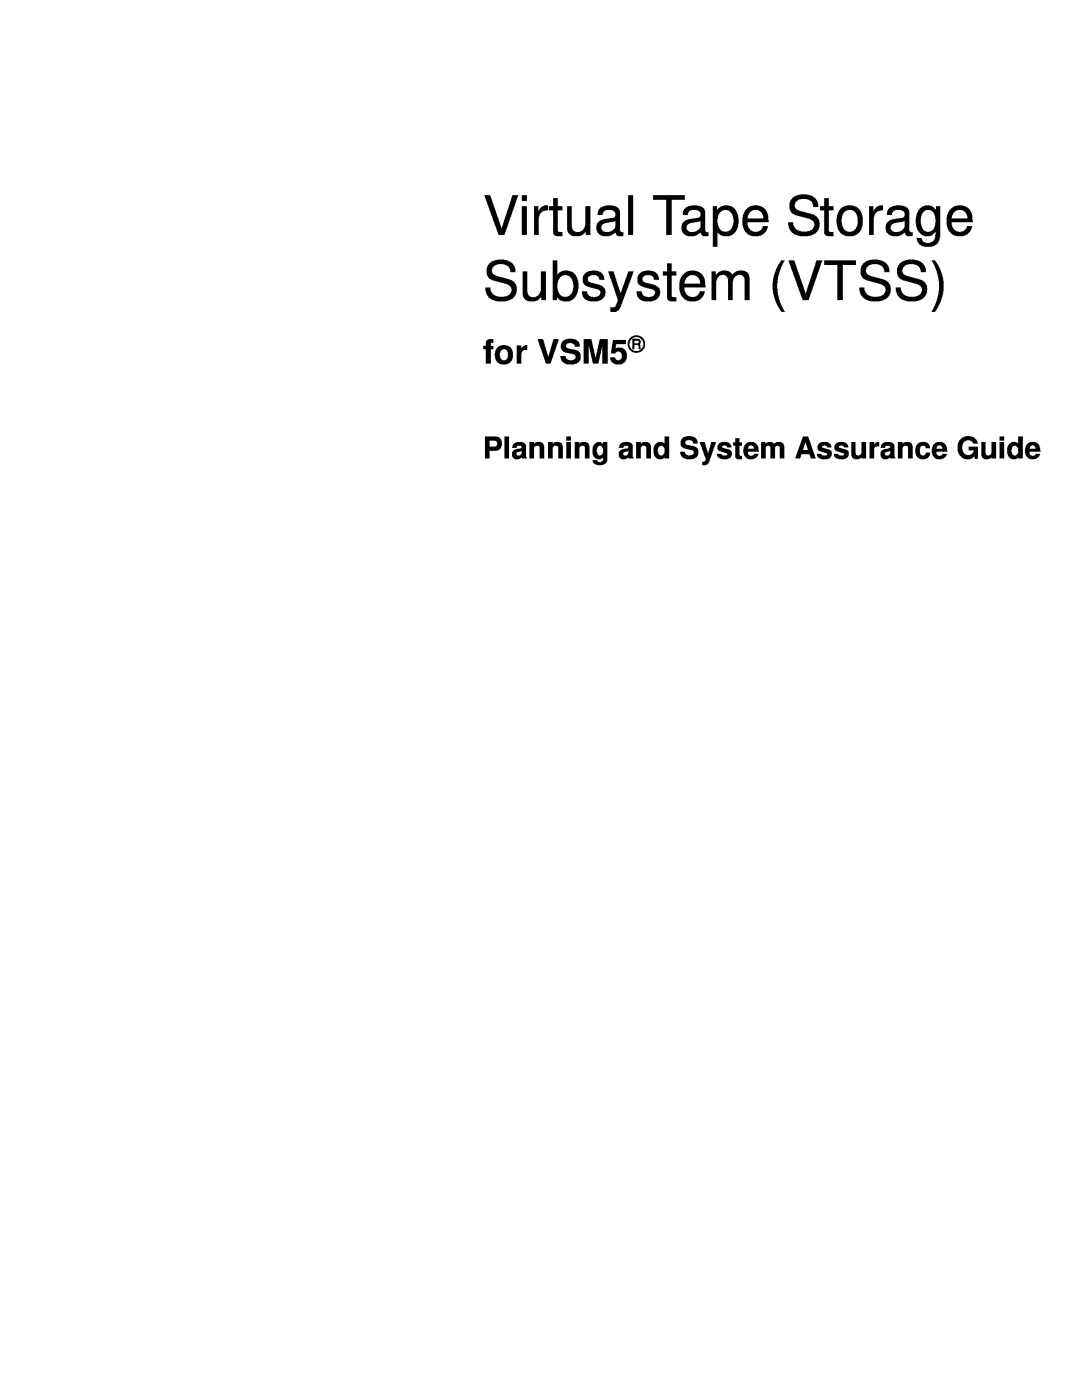 Sun Microsystems 96257 manual for VSM5, Virtual Tape Storage Subsystem VTSS, Planning and System Assurance Guide 